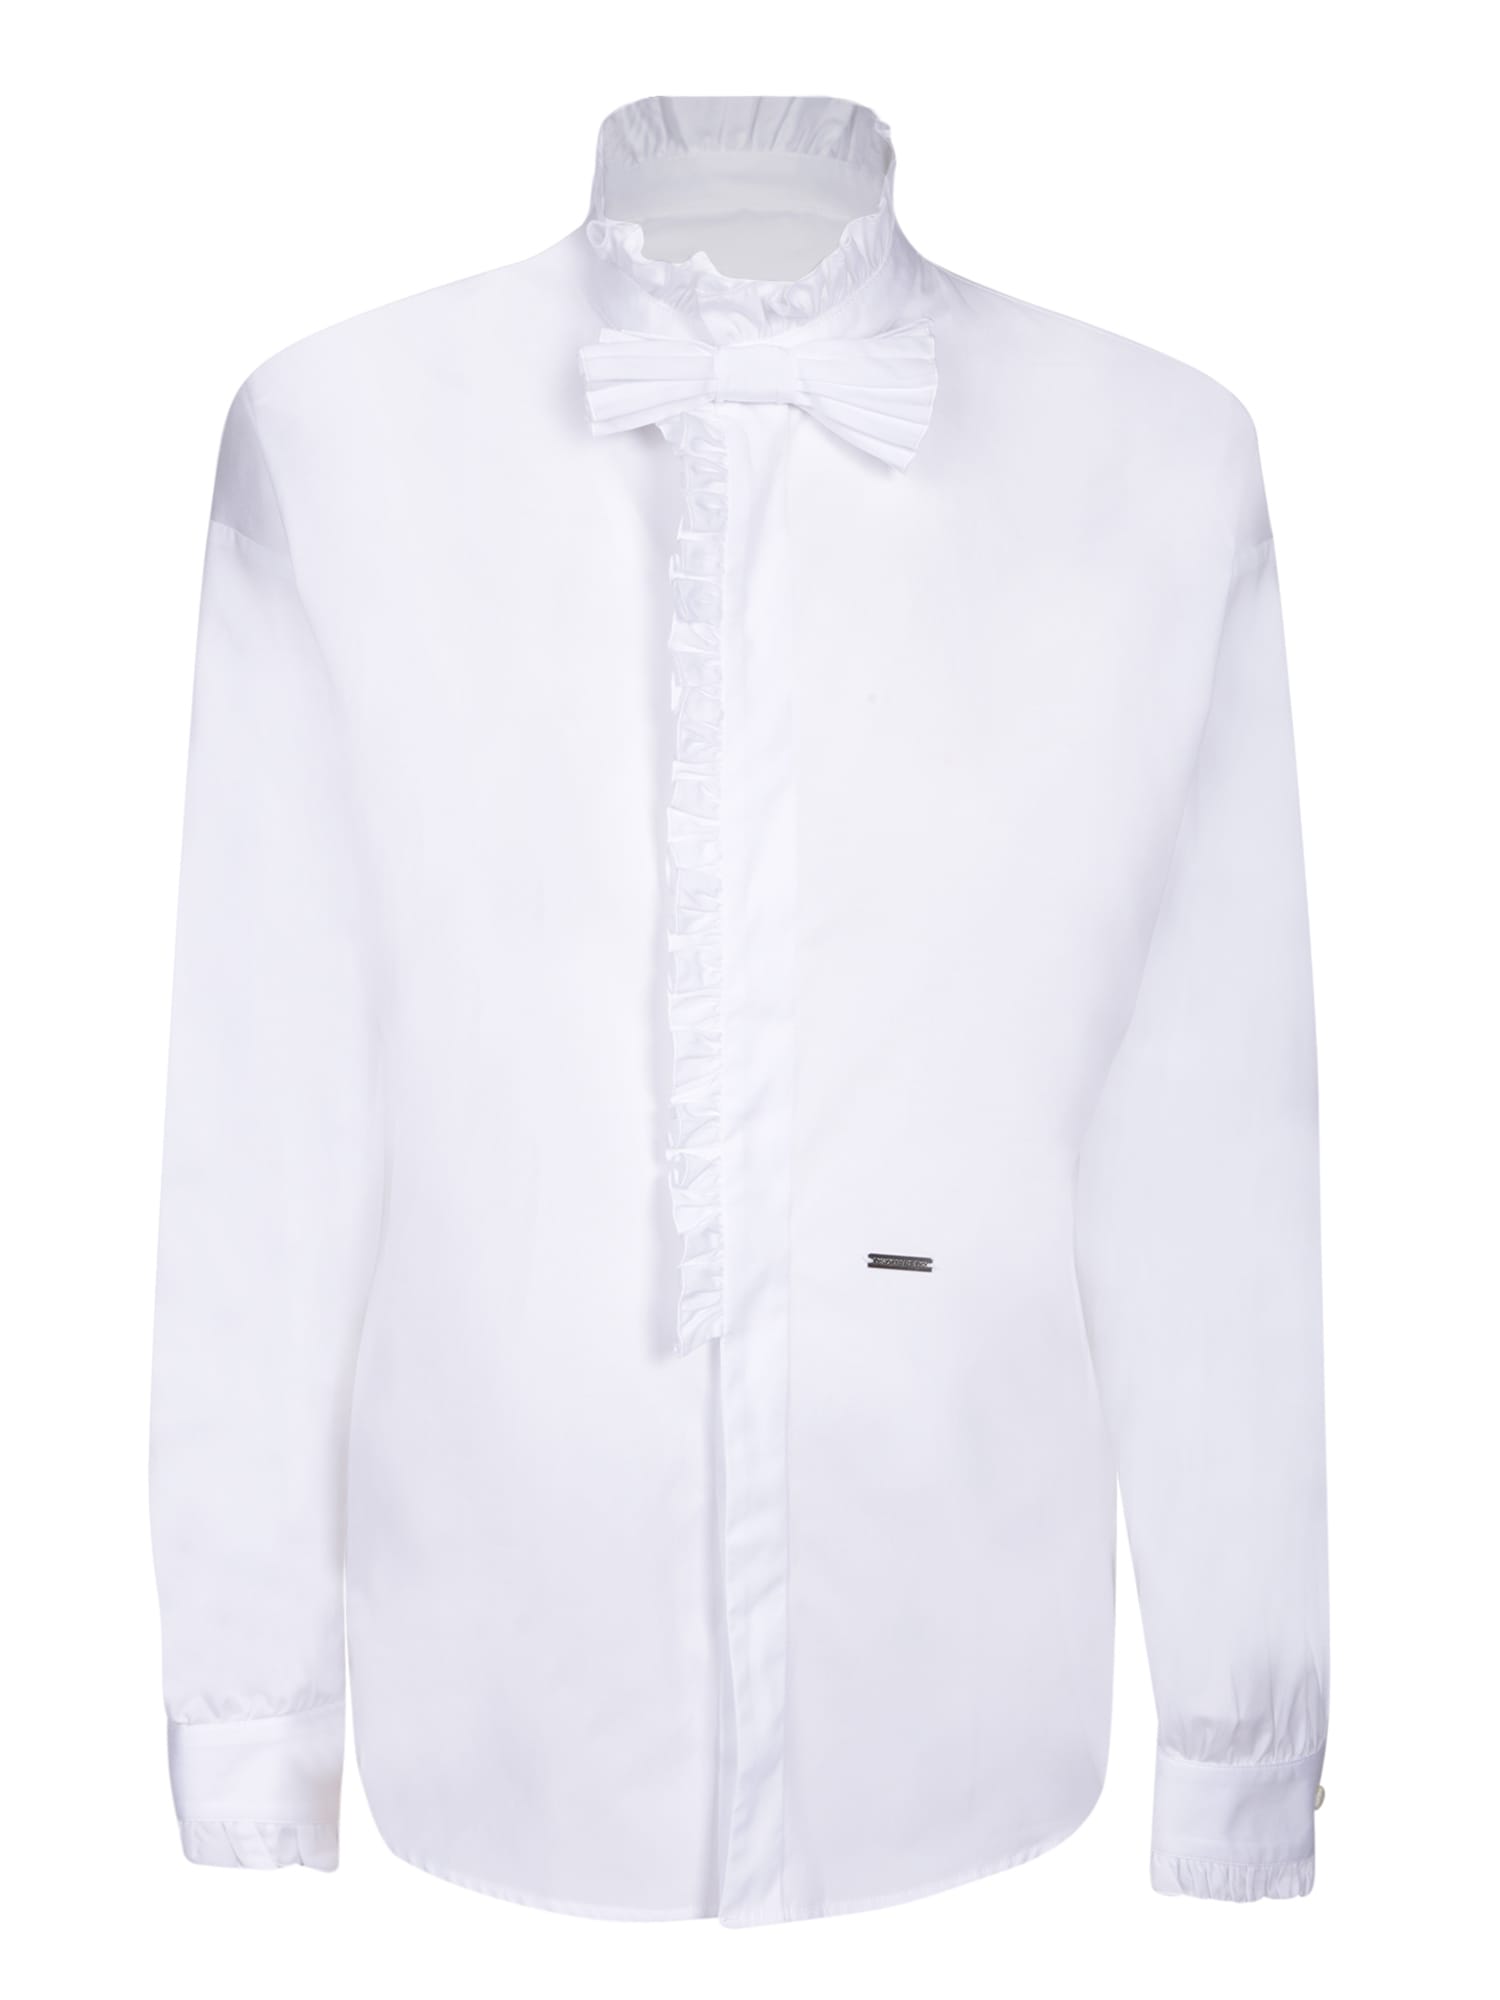 DSQUARED2 BOW TIE WHITE SHIRT